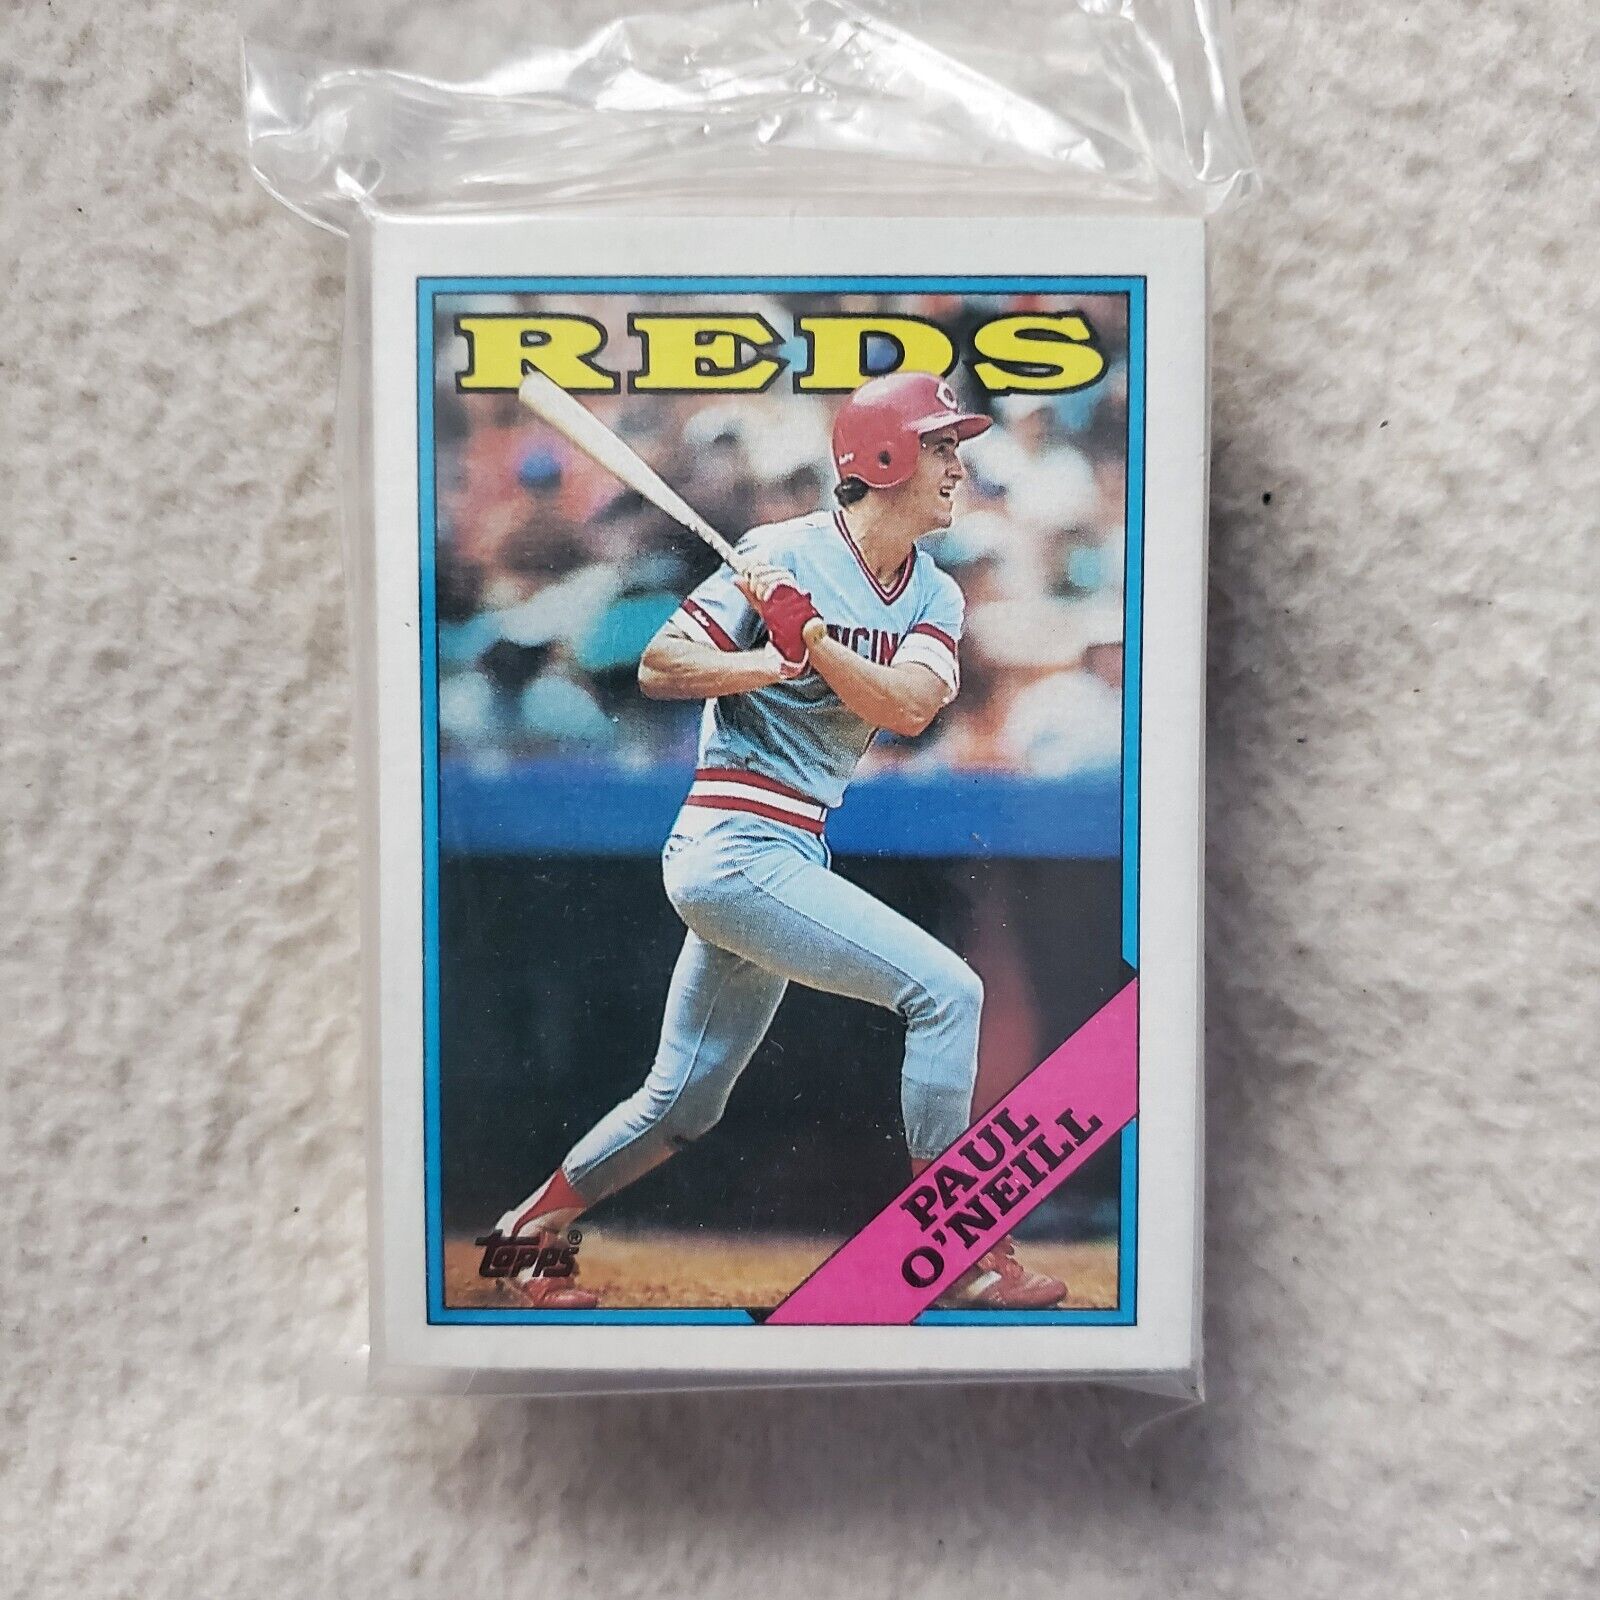 1988 - TOPPS BASEBALL PAUL O'NEILL ROOKIE CARD - 50 COUNT LOOK!!. rookie card picture